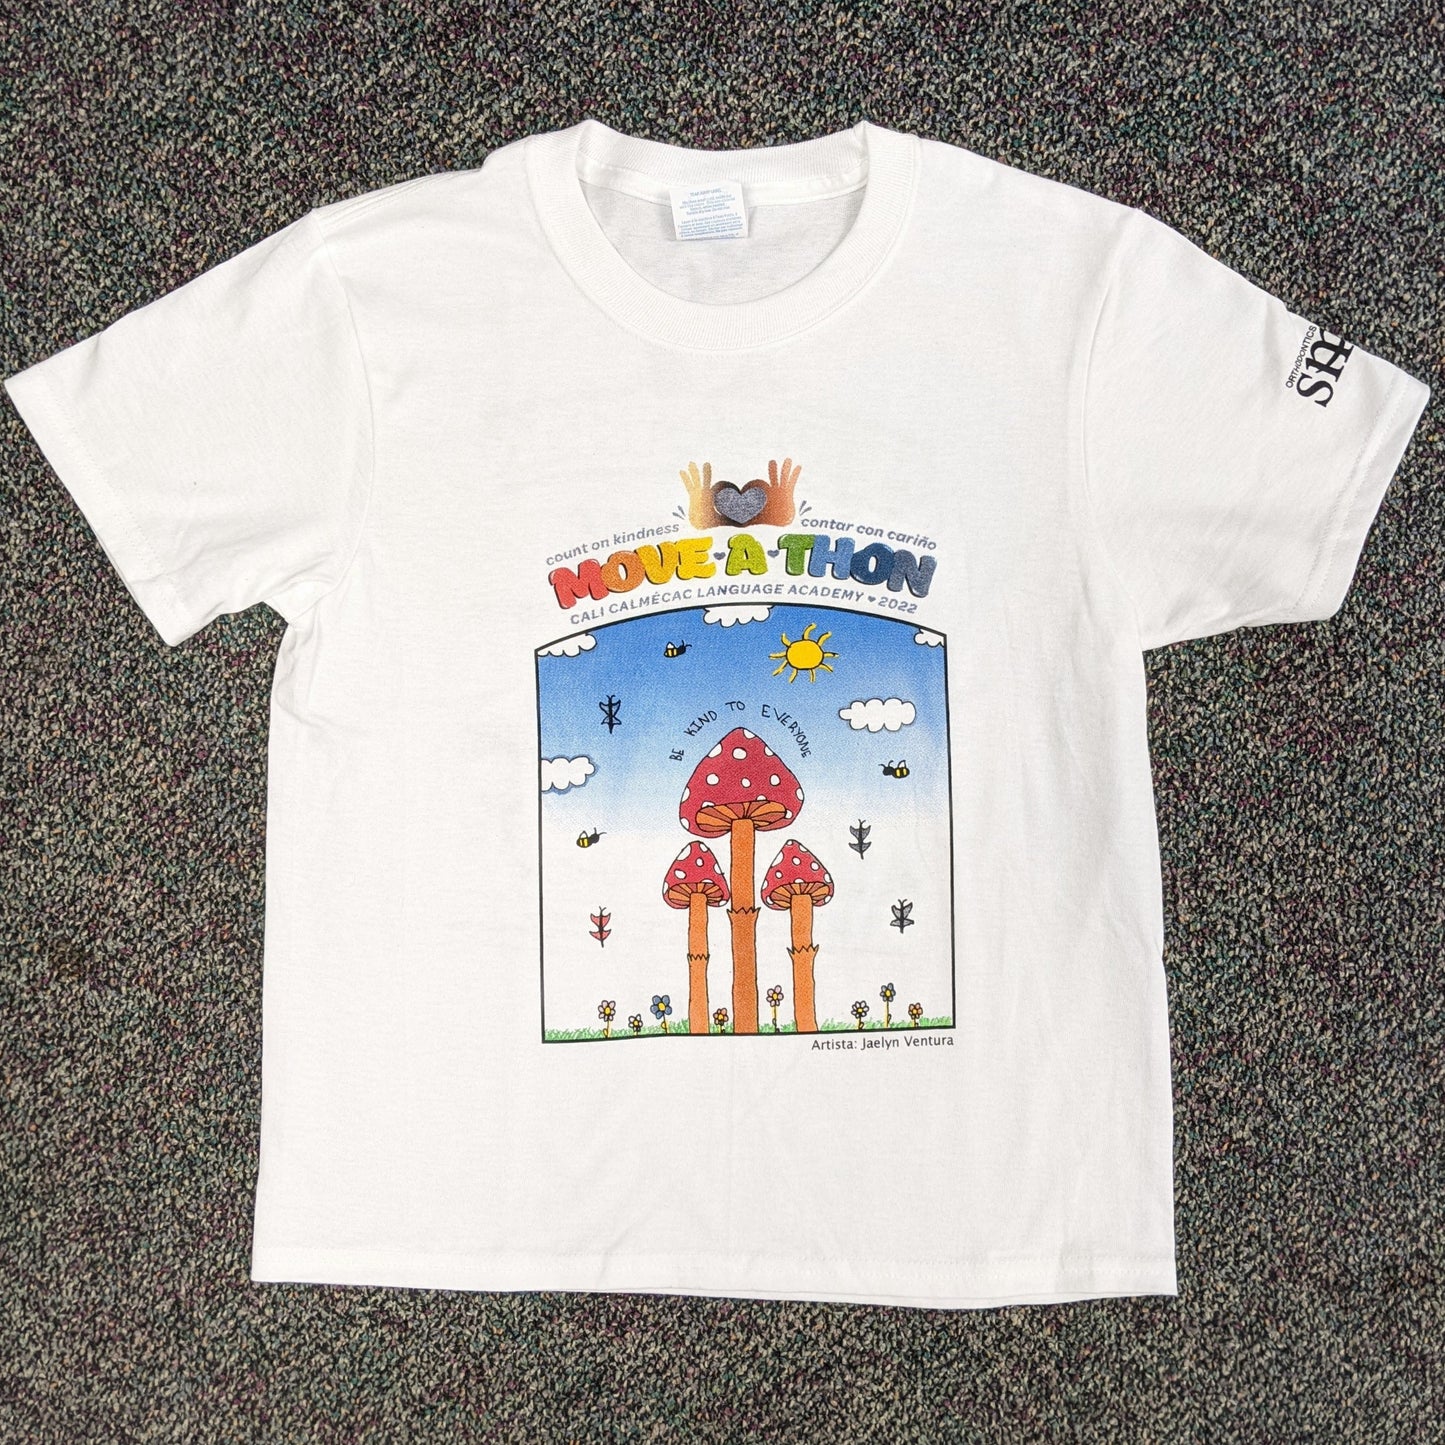 2022 Move-a-thon T-Shirt (Hongos) UNIFORM APPROVED for TK-5th Grade ONLY